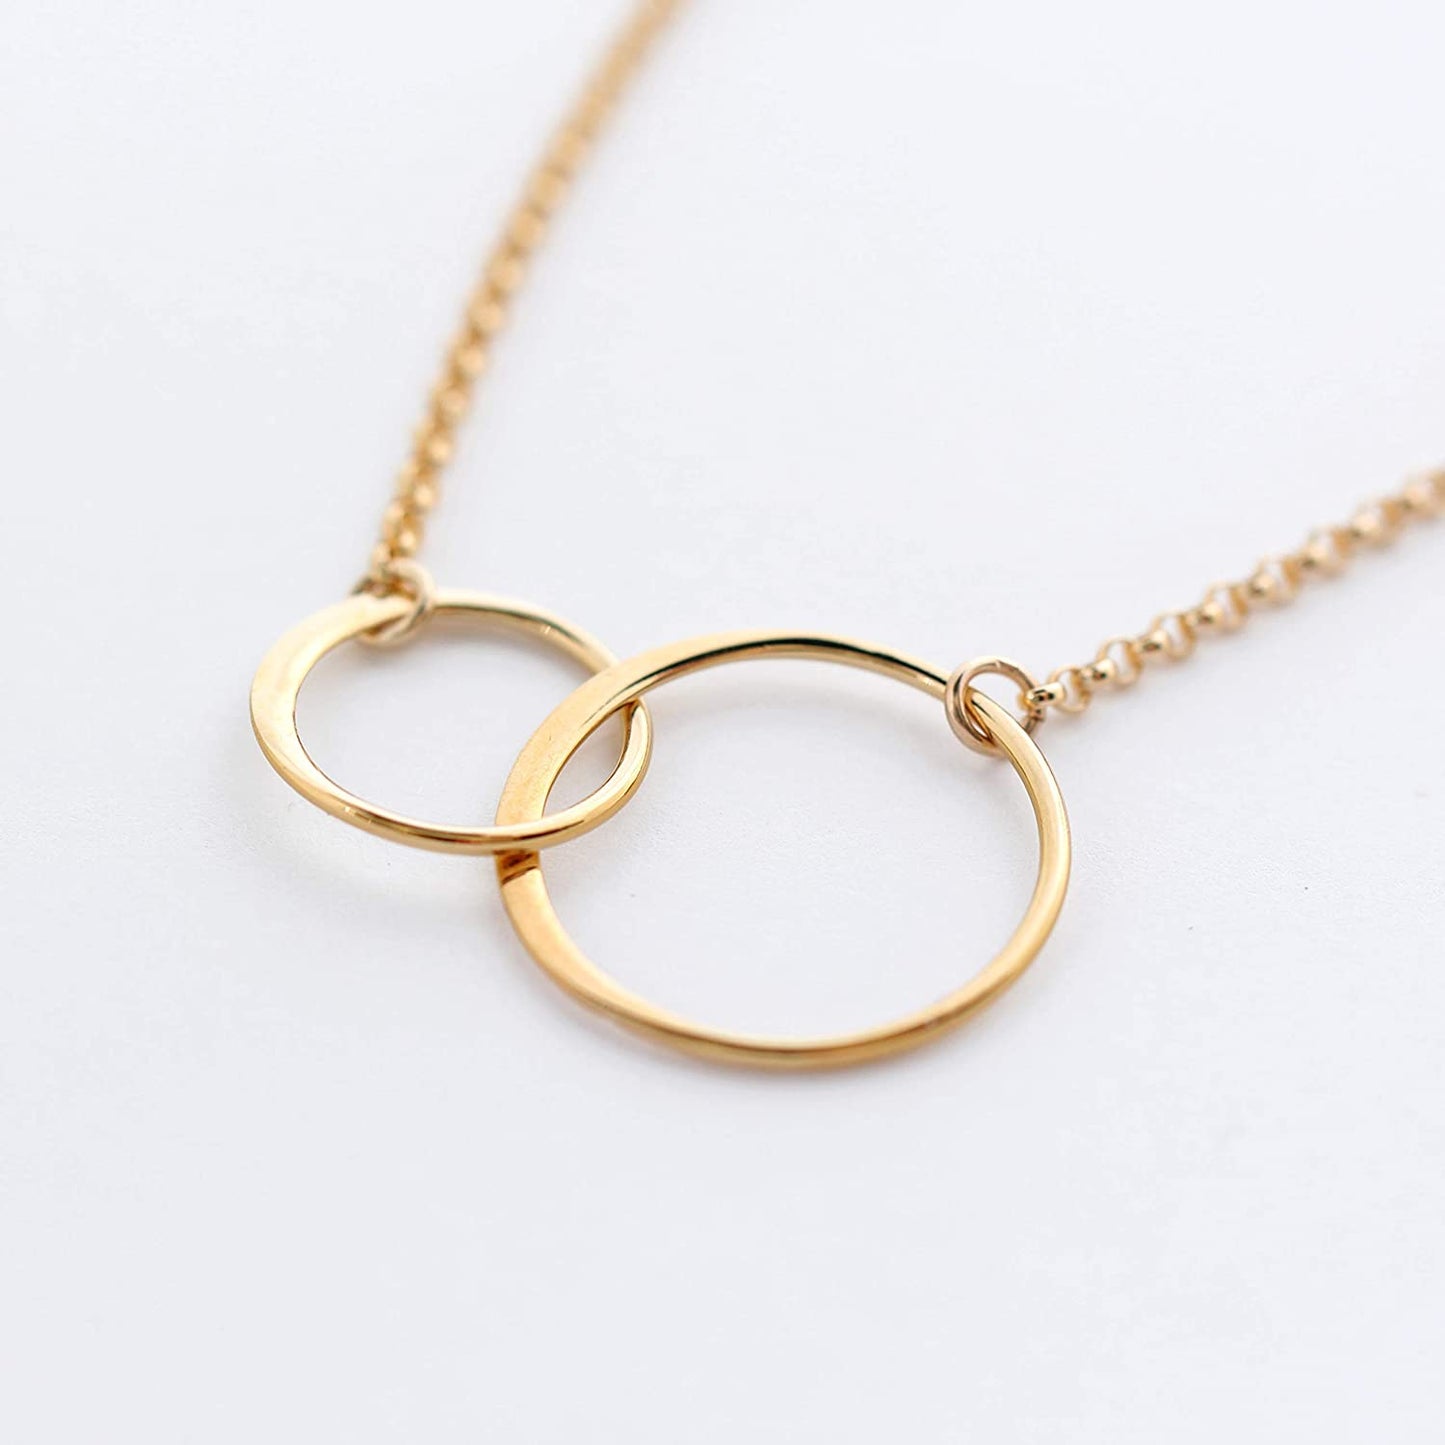 Gold Mother and Son Necklace • Birthday Gifts for Mom • Double Eternity Circle Necklace • Gift for Mom from Son • Mother of the Groom Gift • Christmas Mother's Day • Push Present • Gotcha Gifts